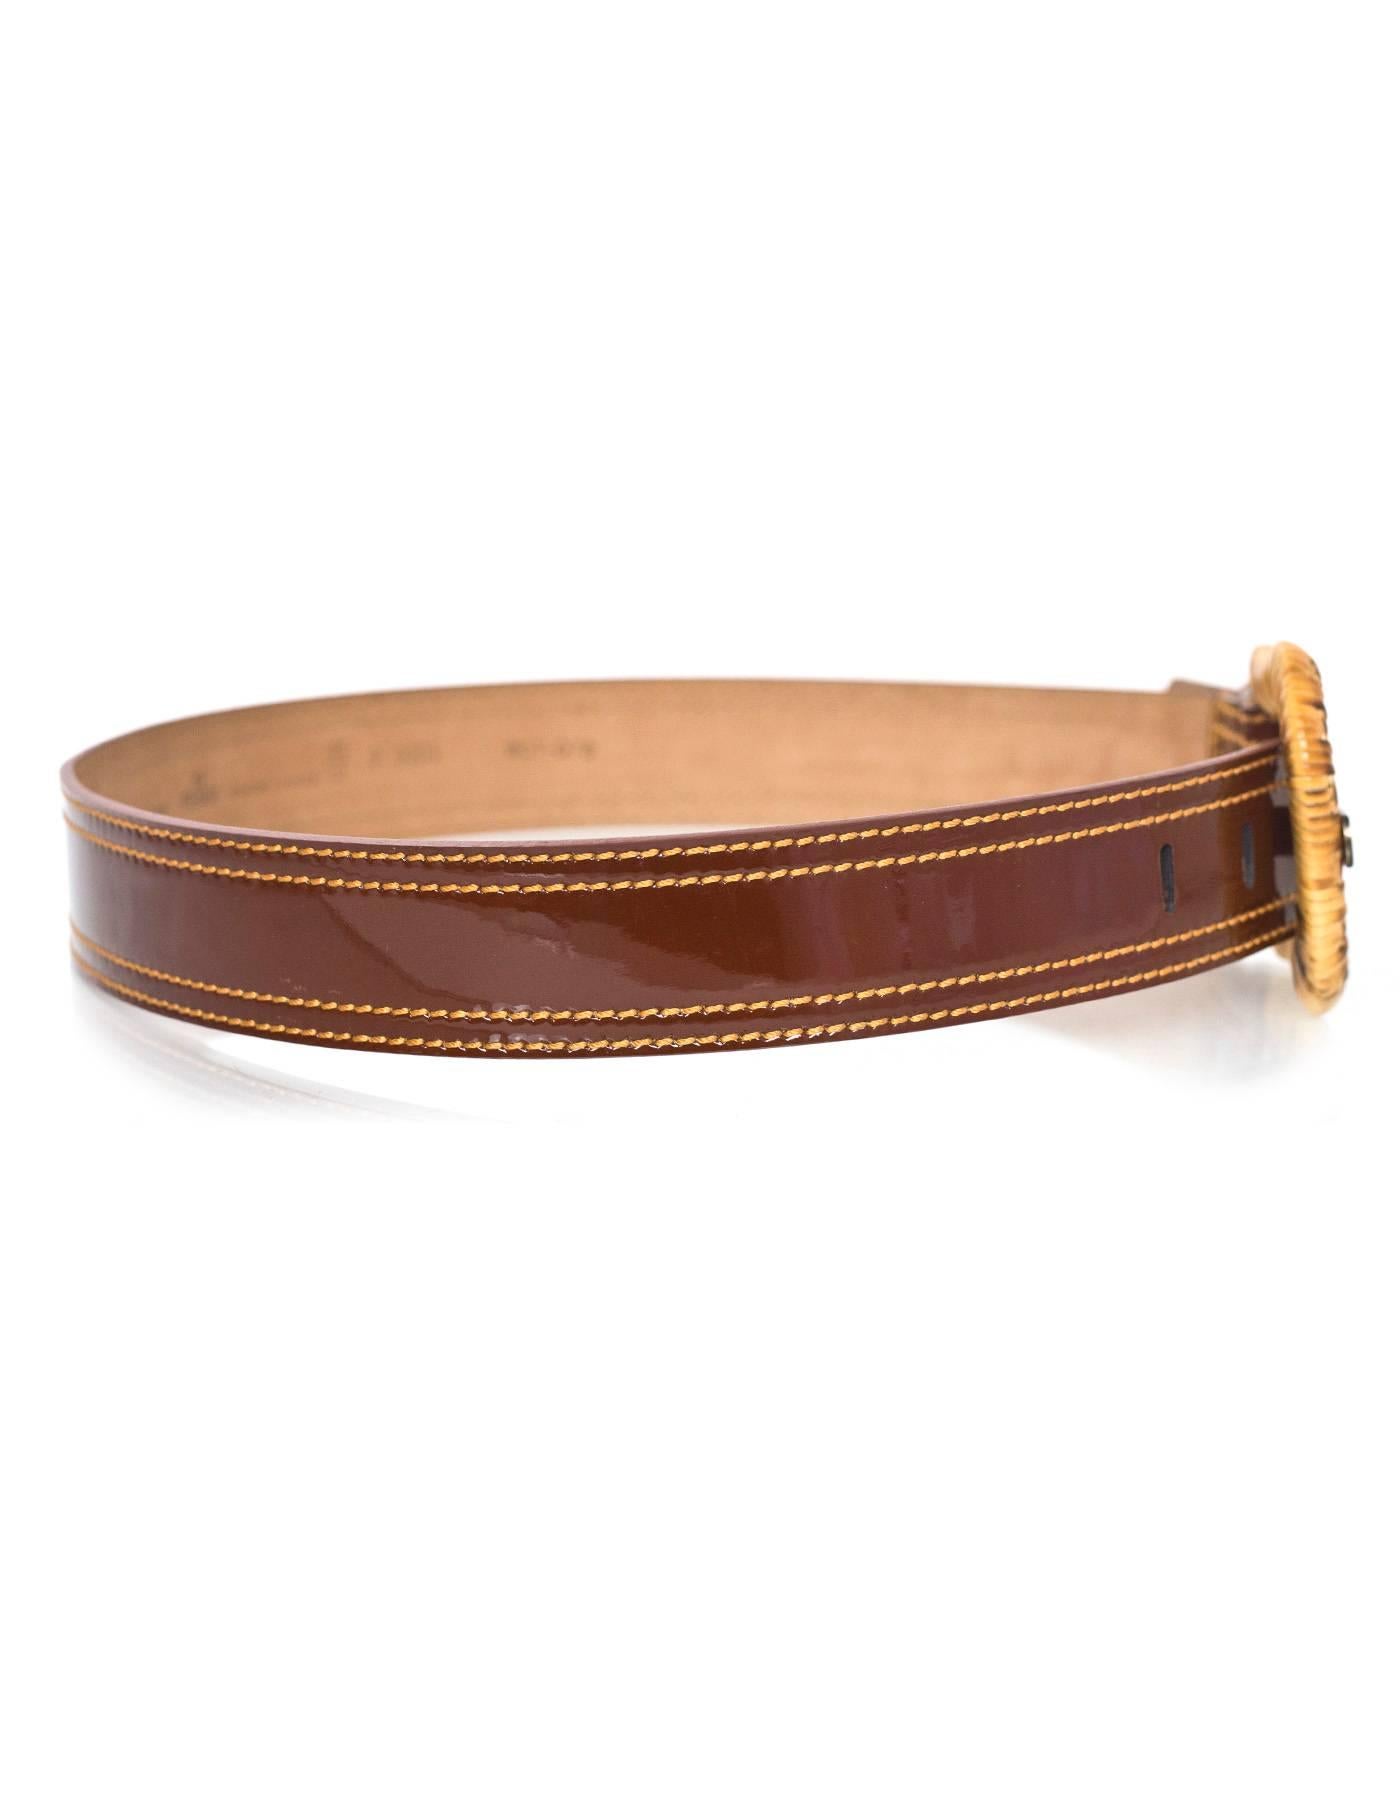 Fendi Brown Patent & Wicker Belt 
Features wicker wrapped belt buckle 

Made In: Italy
Color: Brown and tan
Hardware: Wicker and bronze
Materials: Patent leather and wicker
Closure/Opening: Buckle and notch closure
Stamp: 8C0303 WCT-078
Overall